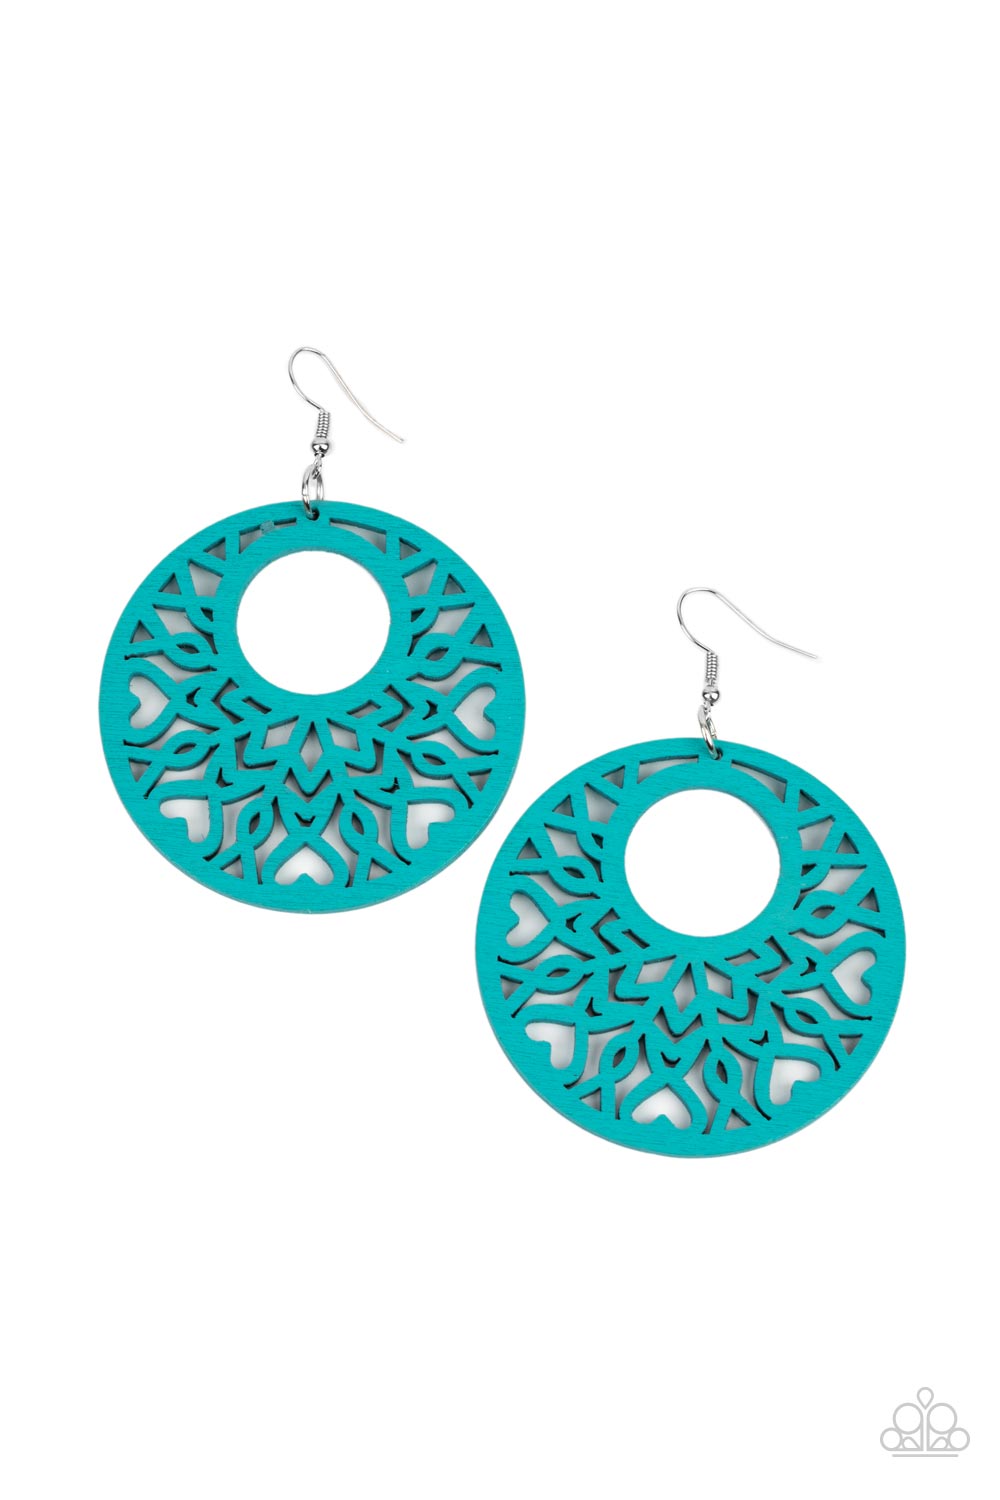 Tropical Reef - Blue Wood - Silver Earrings - Paparazzi Accessories - Refreshing blue, an airy circular wooden frame features a cut-out heart motif reminiscent of bohemian designs creating a free-spirited allure.